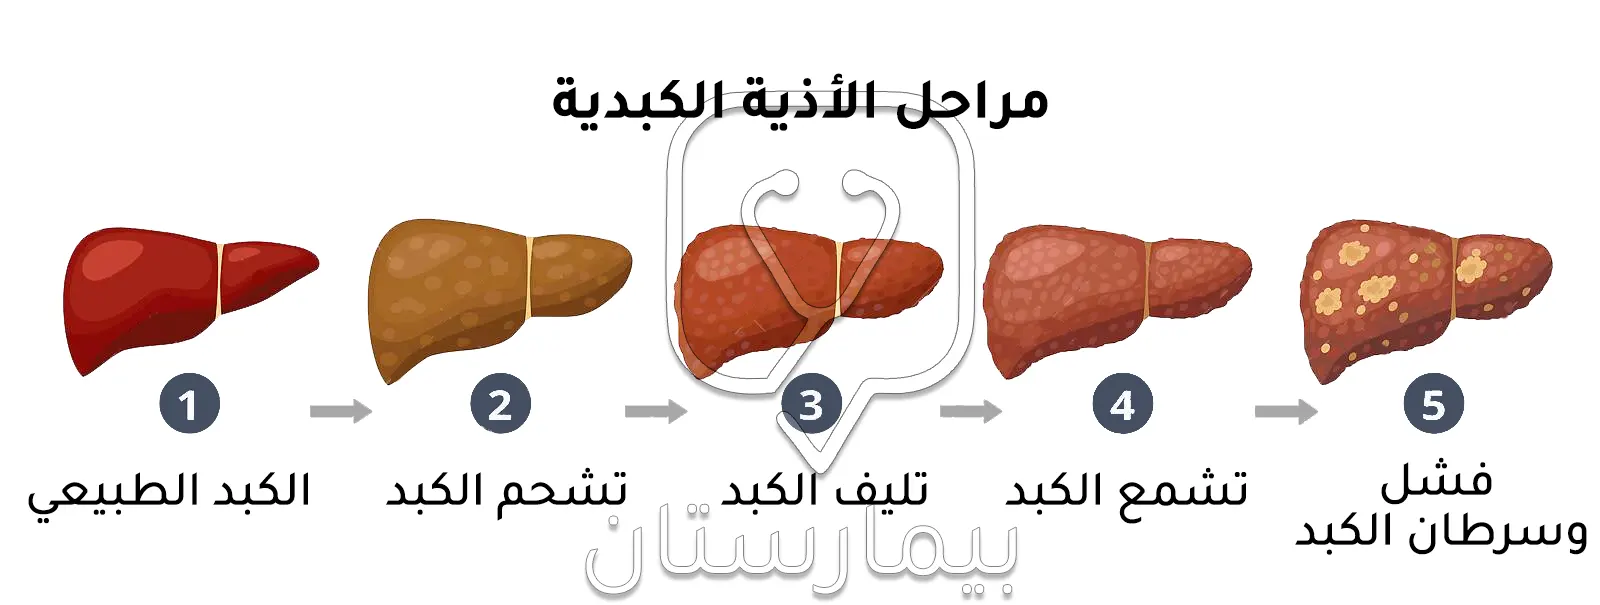 A picture showing the stages of liver damage that require treatment for cirrhosis